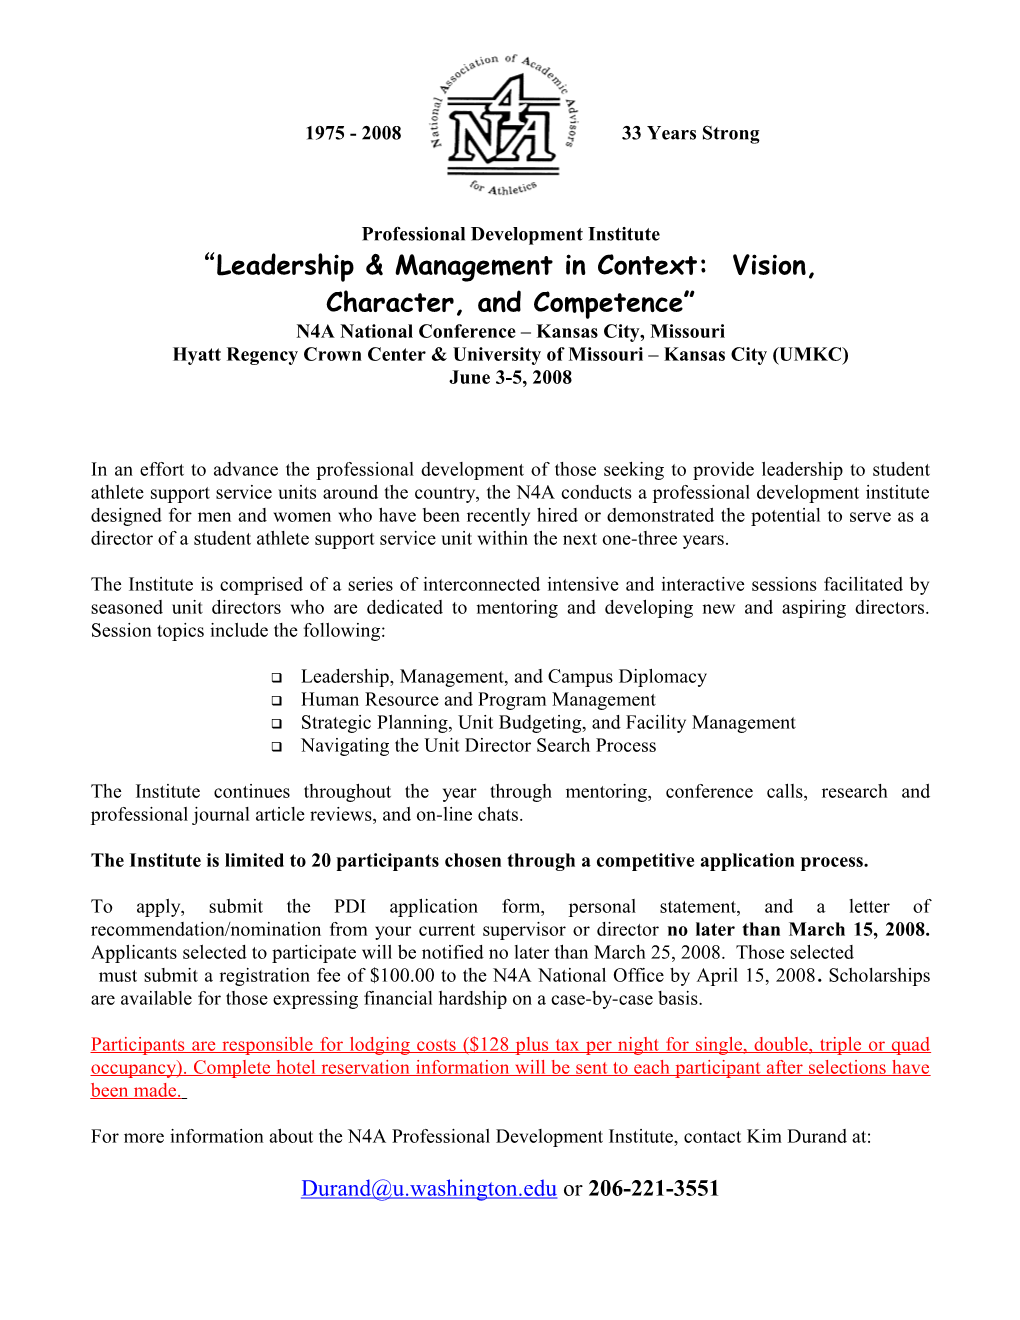 N4A Leadership Institute Application Form